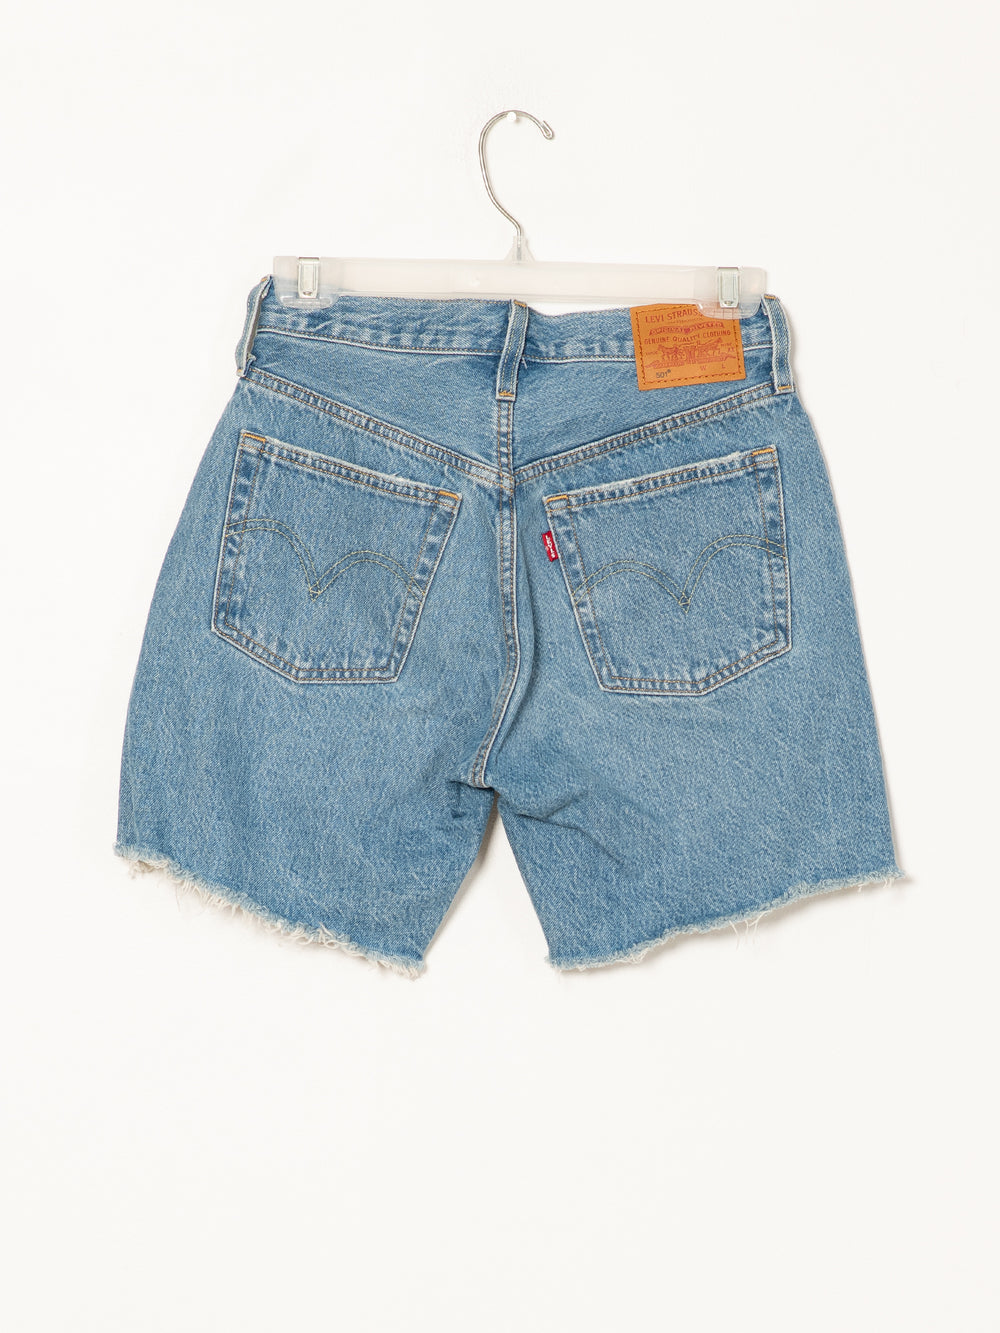 LEVIS 501 MID THIGH SHORT  - CLEARANCE